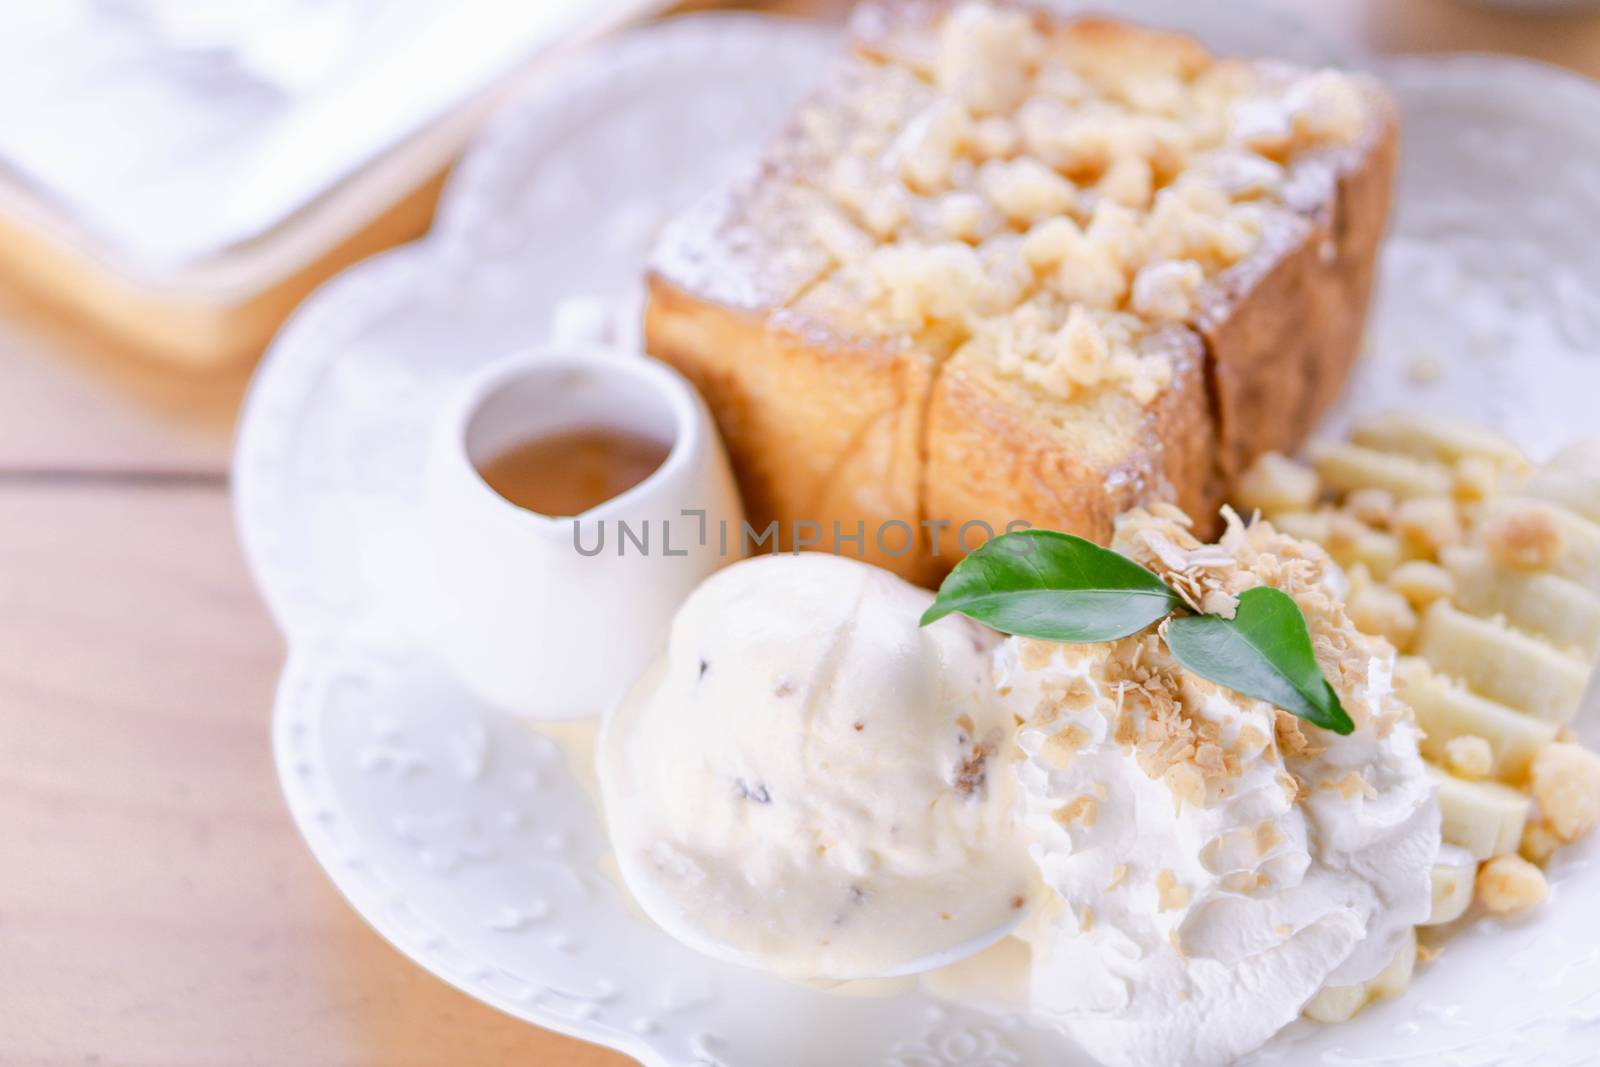 Honey toast dessert with ice coffee on wood table, top view by pt.pongsak@gmail.com